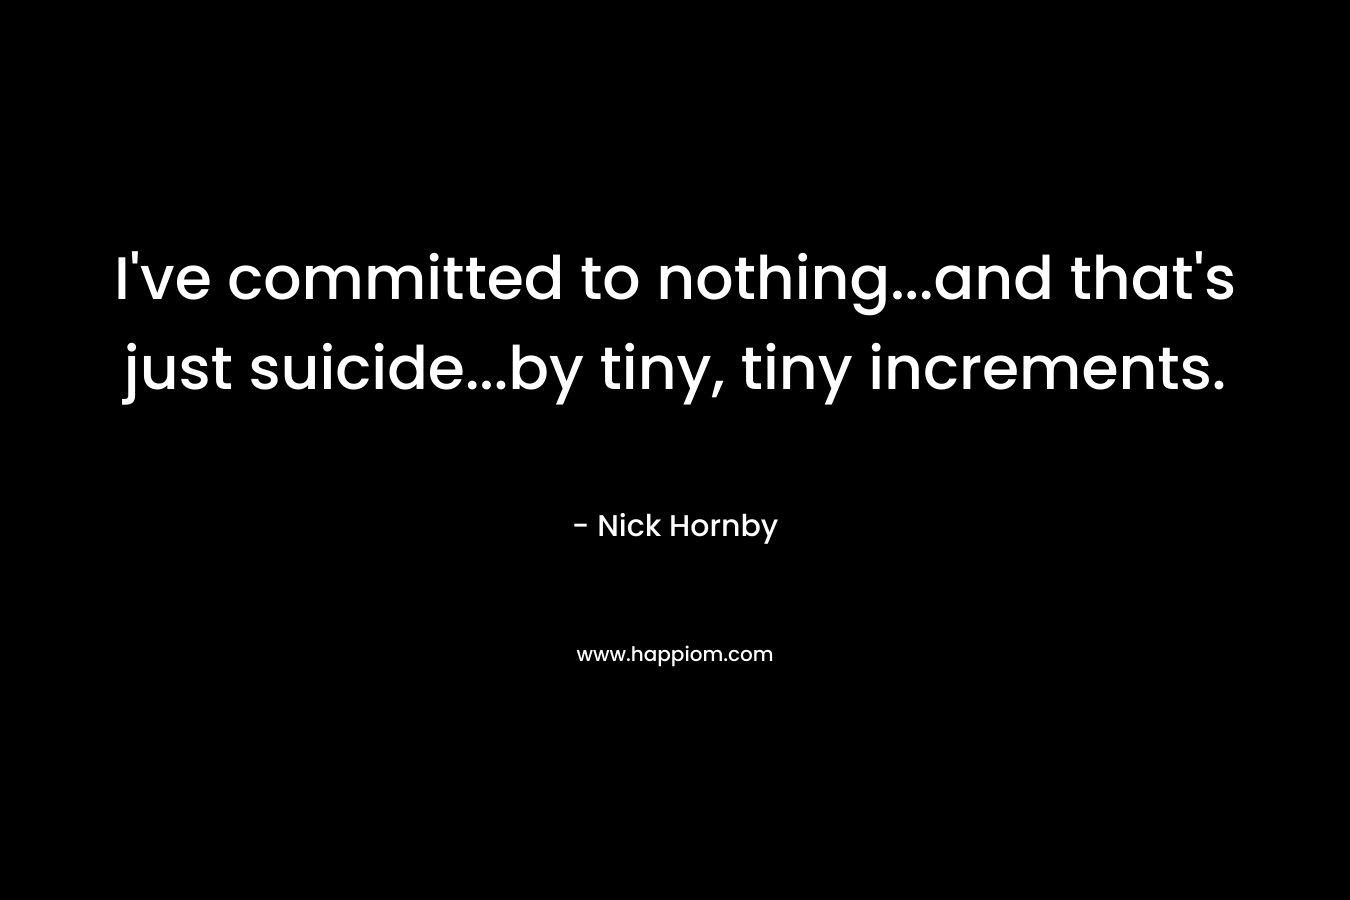 I've committed to nothing...and that's just suicide...by tiny, tiny increments.